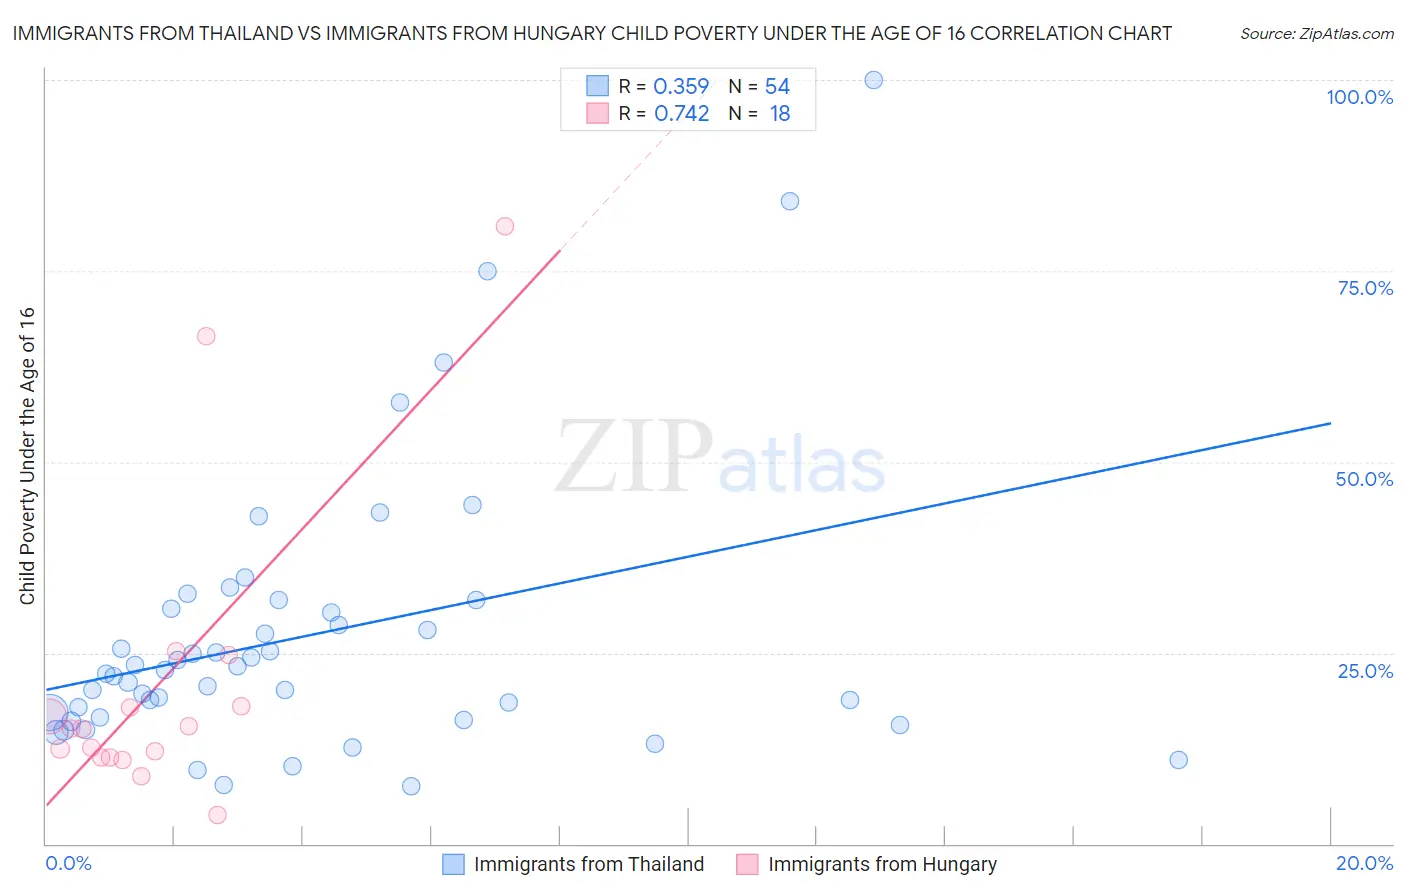 Immigrants from Thailand vs Immigrants from Hungary Child Poverty Under the Age of 16